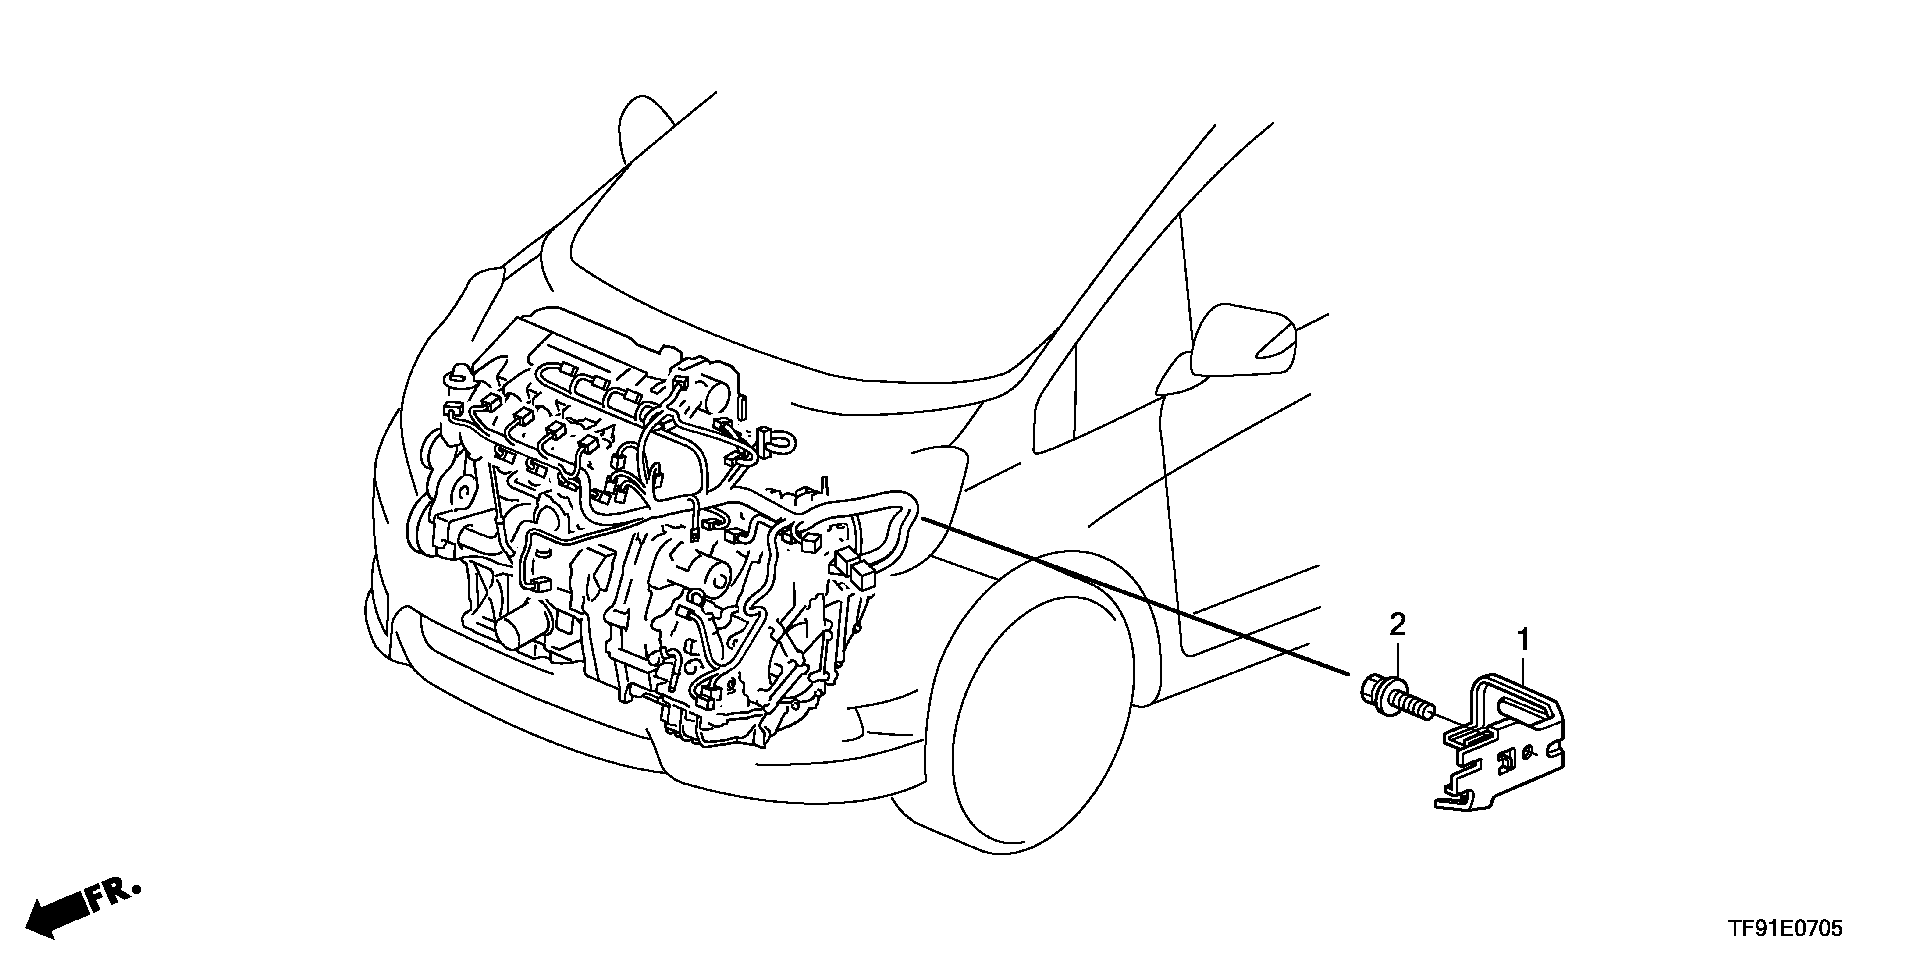 ENGINE WIRE HARNESS STAY